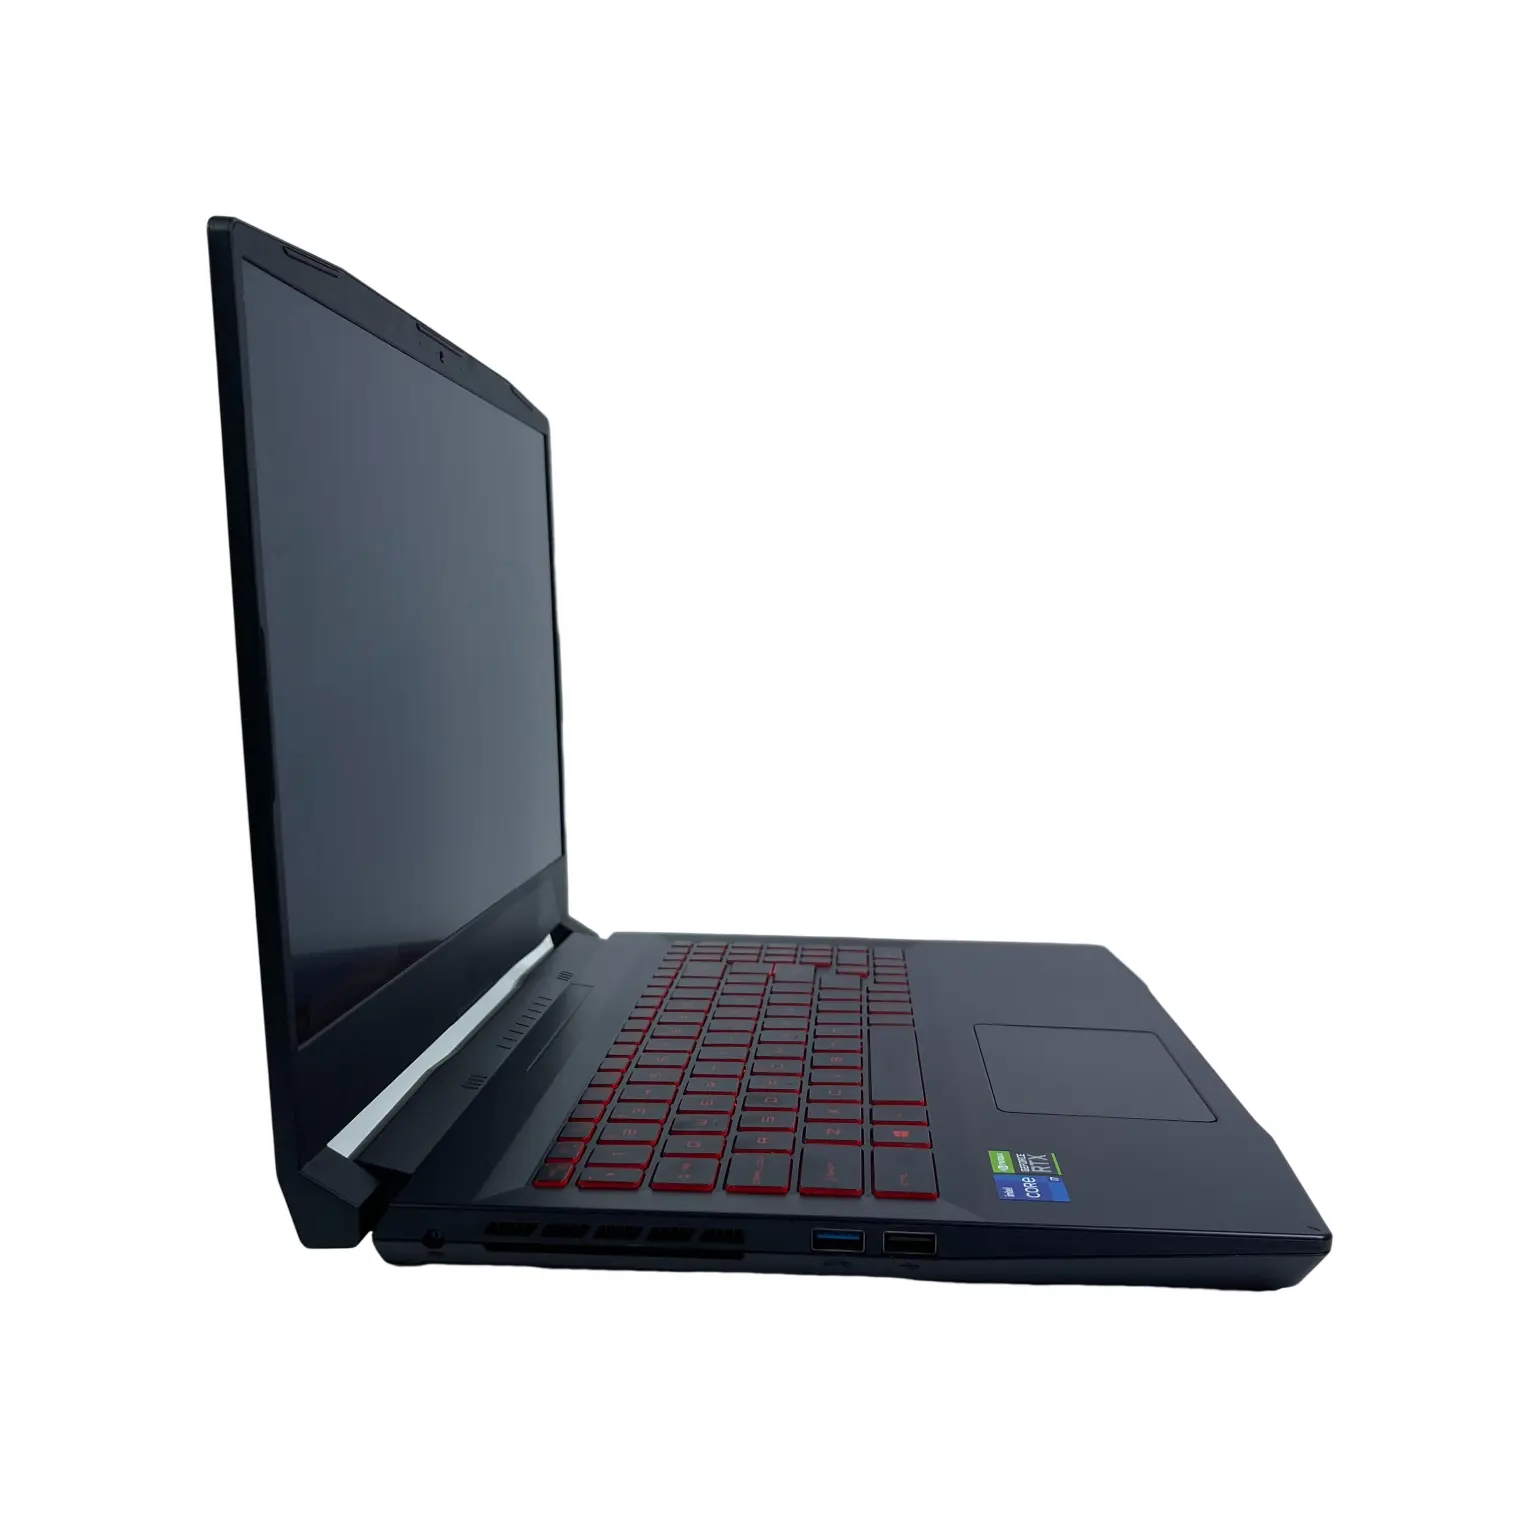 Hot Selling Good Price High Quality&High Performance Portable Laptop Business&Gaming Laptop Computer